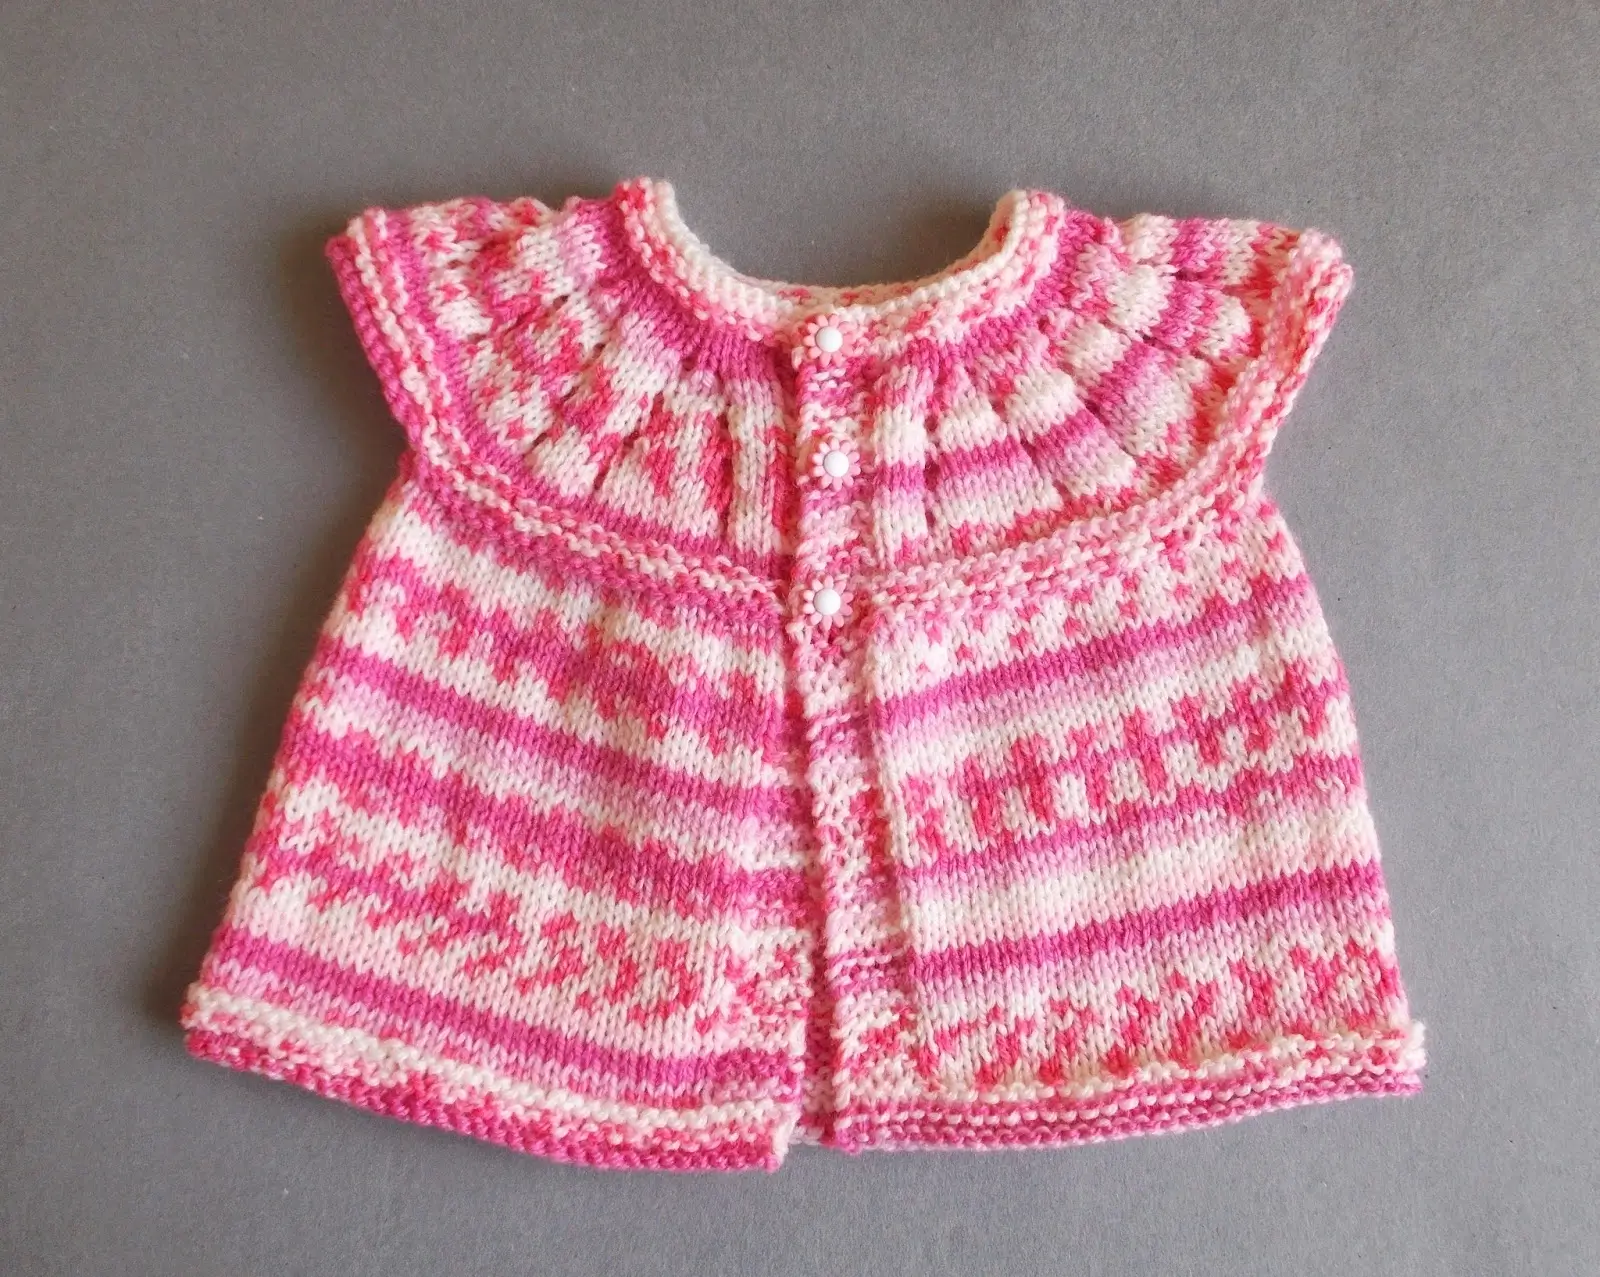 400 free patterns from marianna